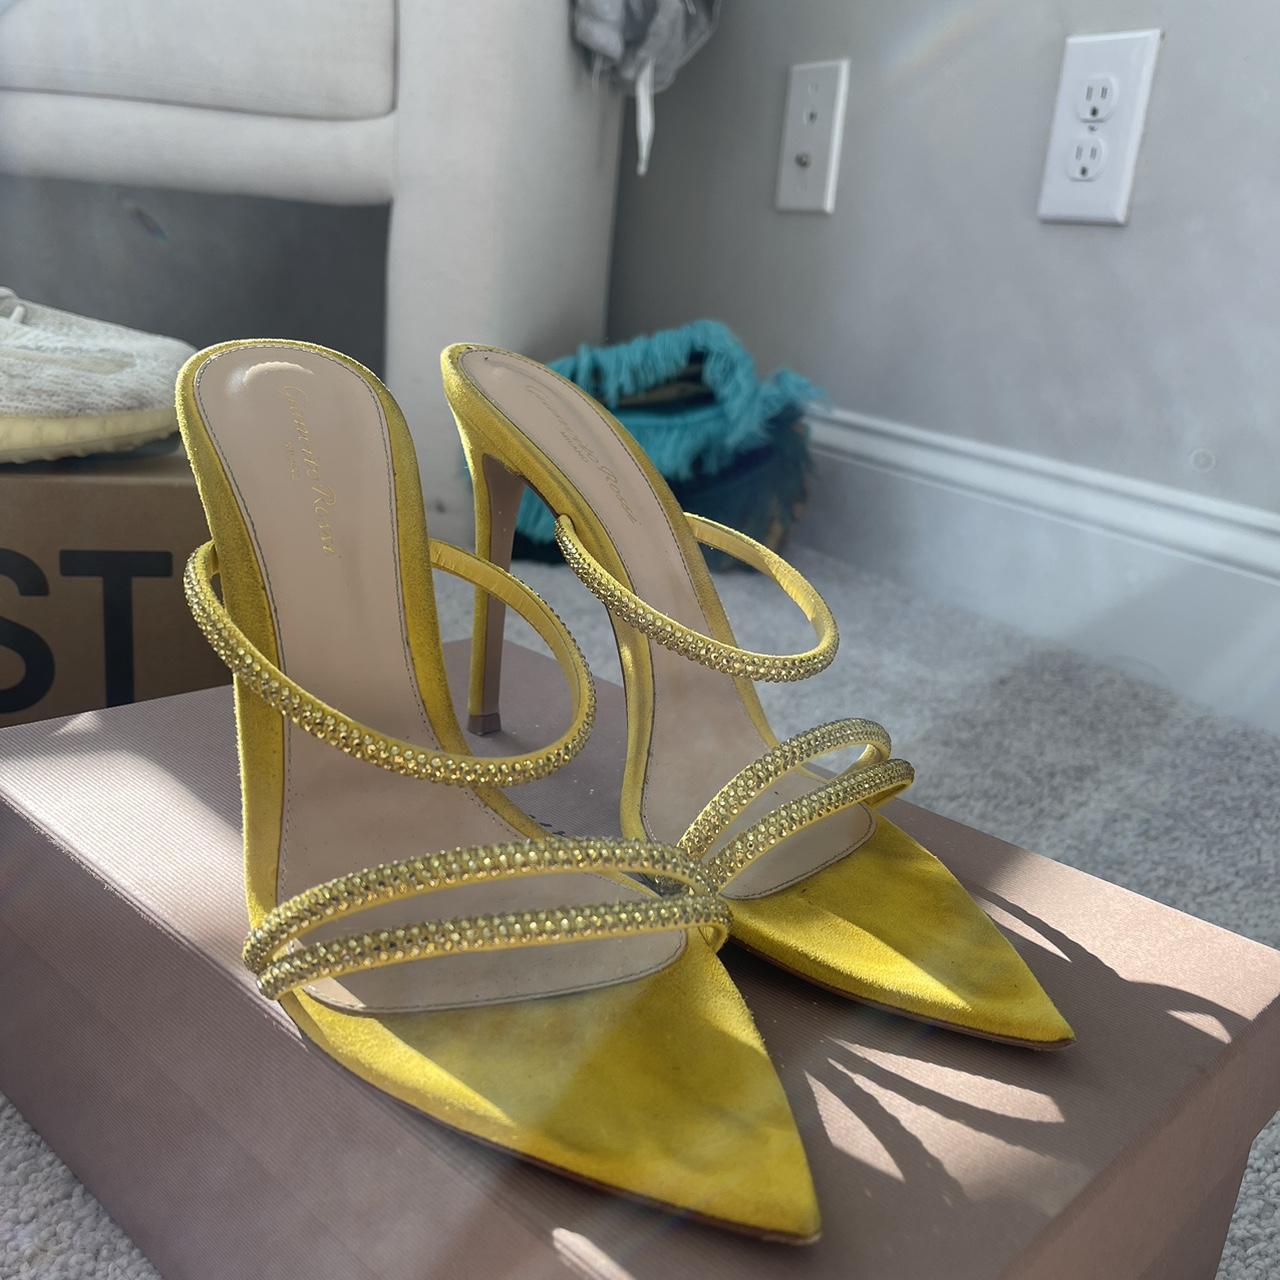 Gianvito Rossi Cannes 105mm suede sandals in size 40... - Depop